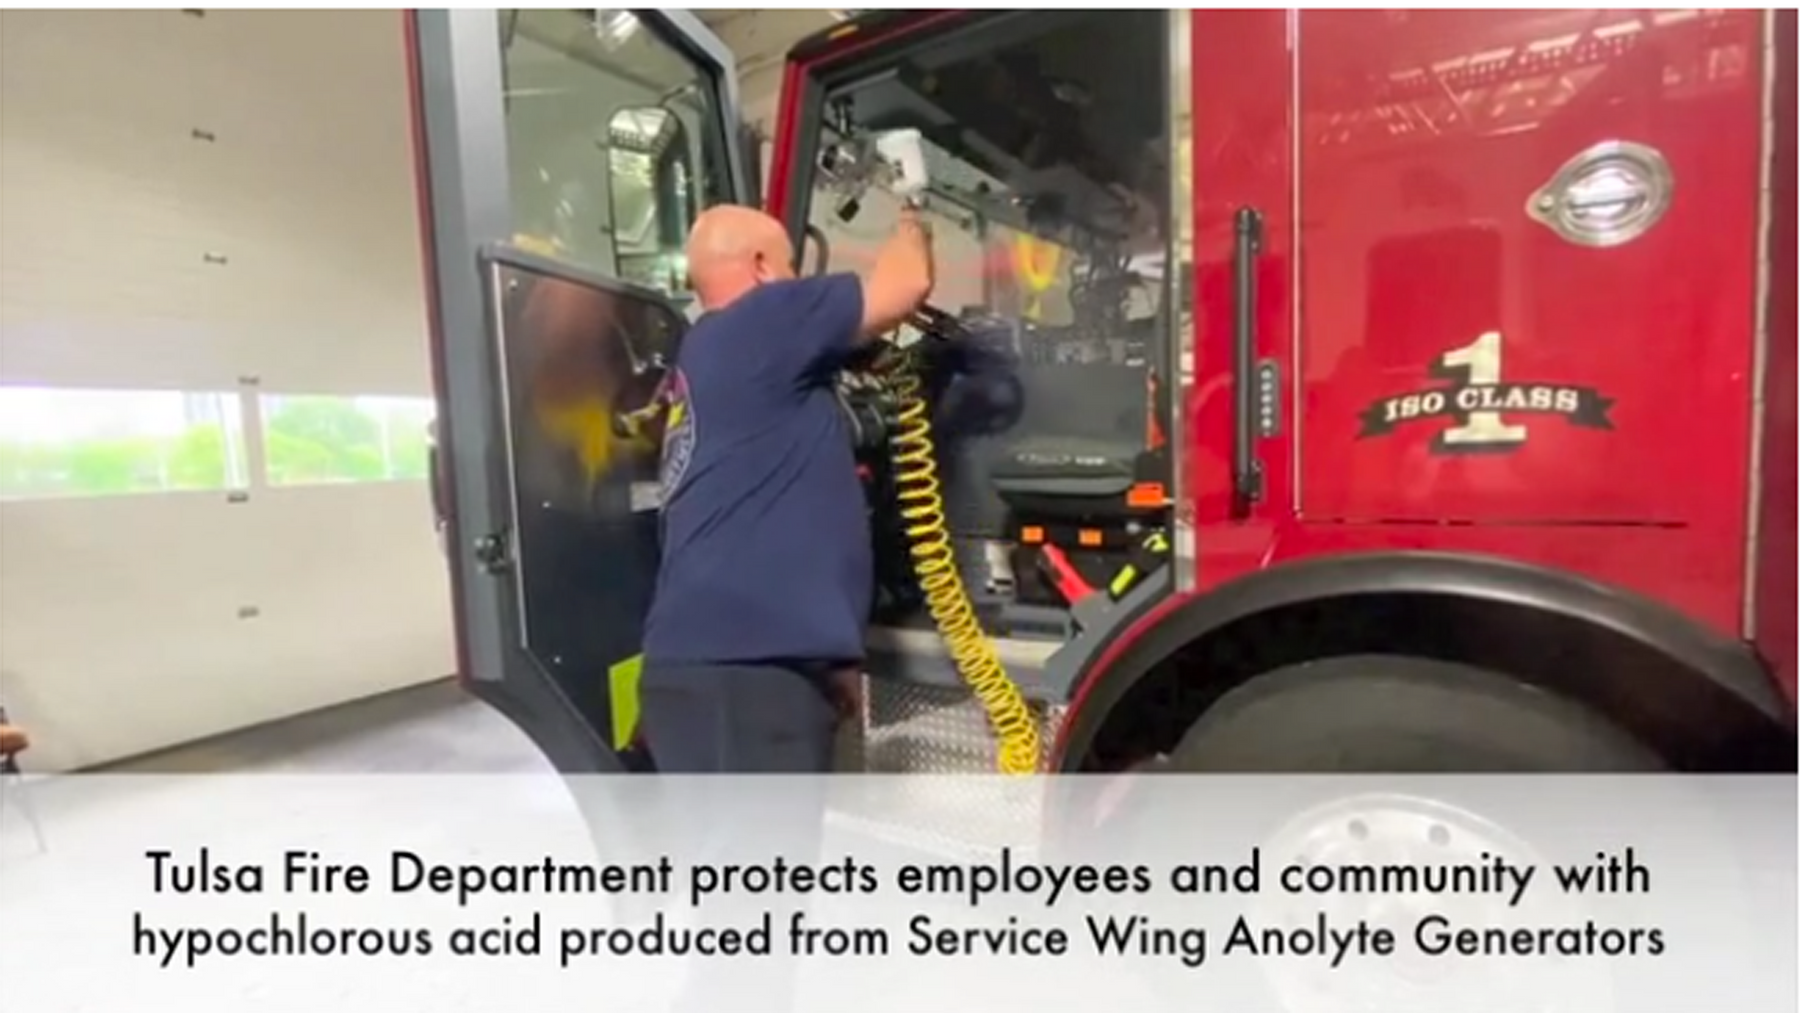 Tulsa Fire Department uses Hypochlorous Acid produced from their Service Wing Anolyte Generator to keep employees and community safe!